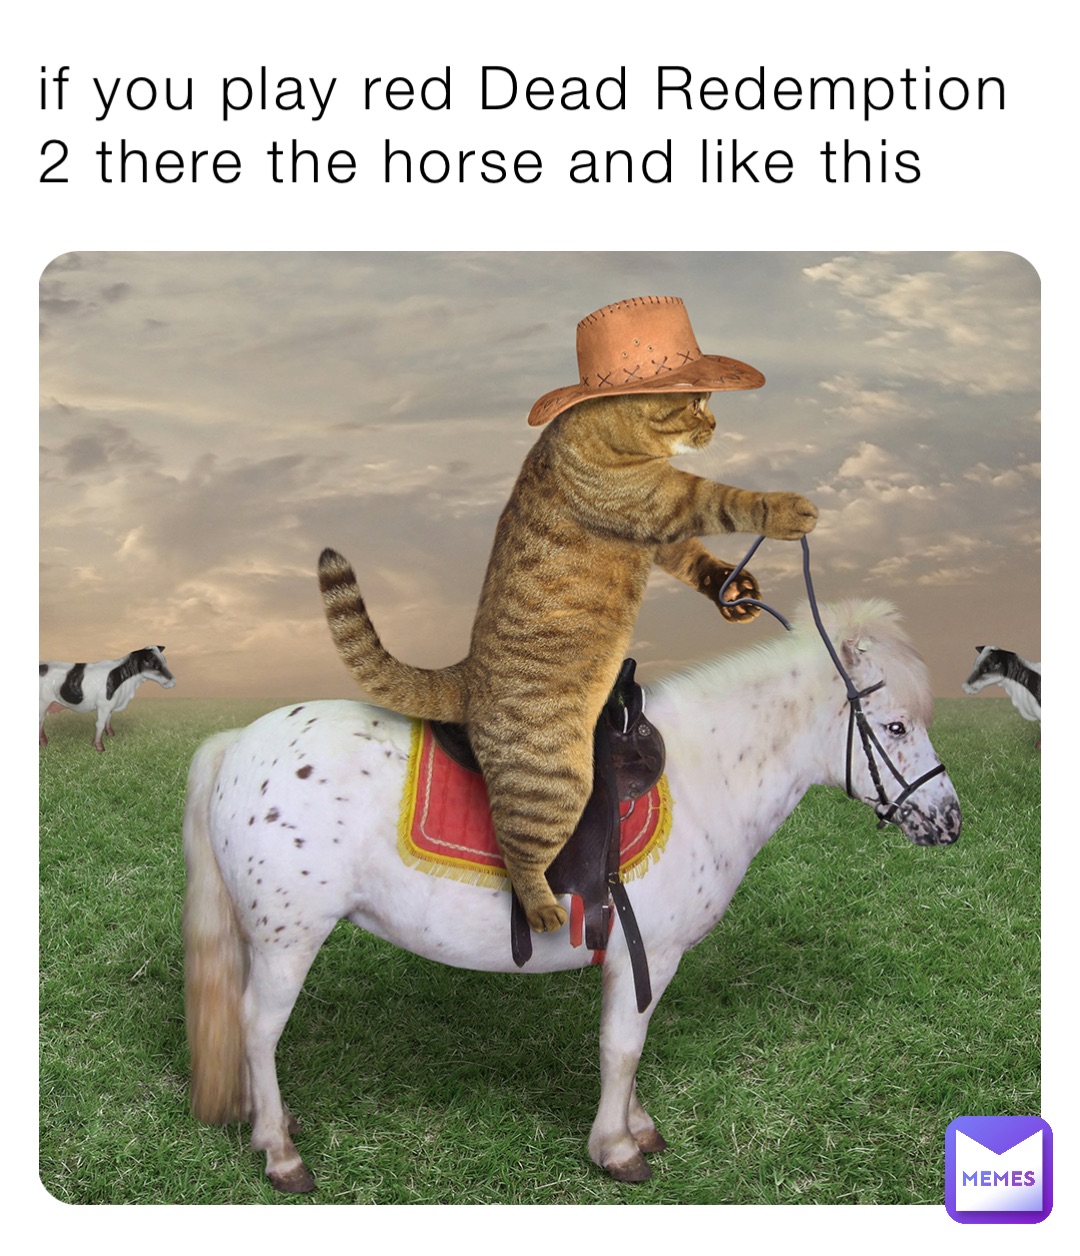 if you play red Dead Redemption 2 there the horse and like this